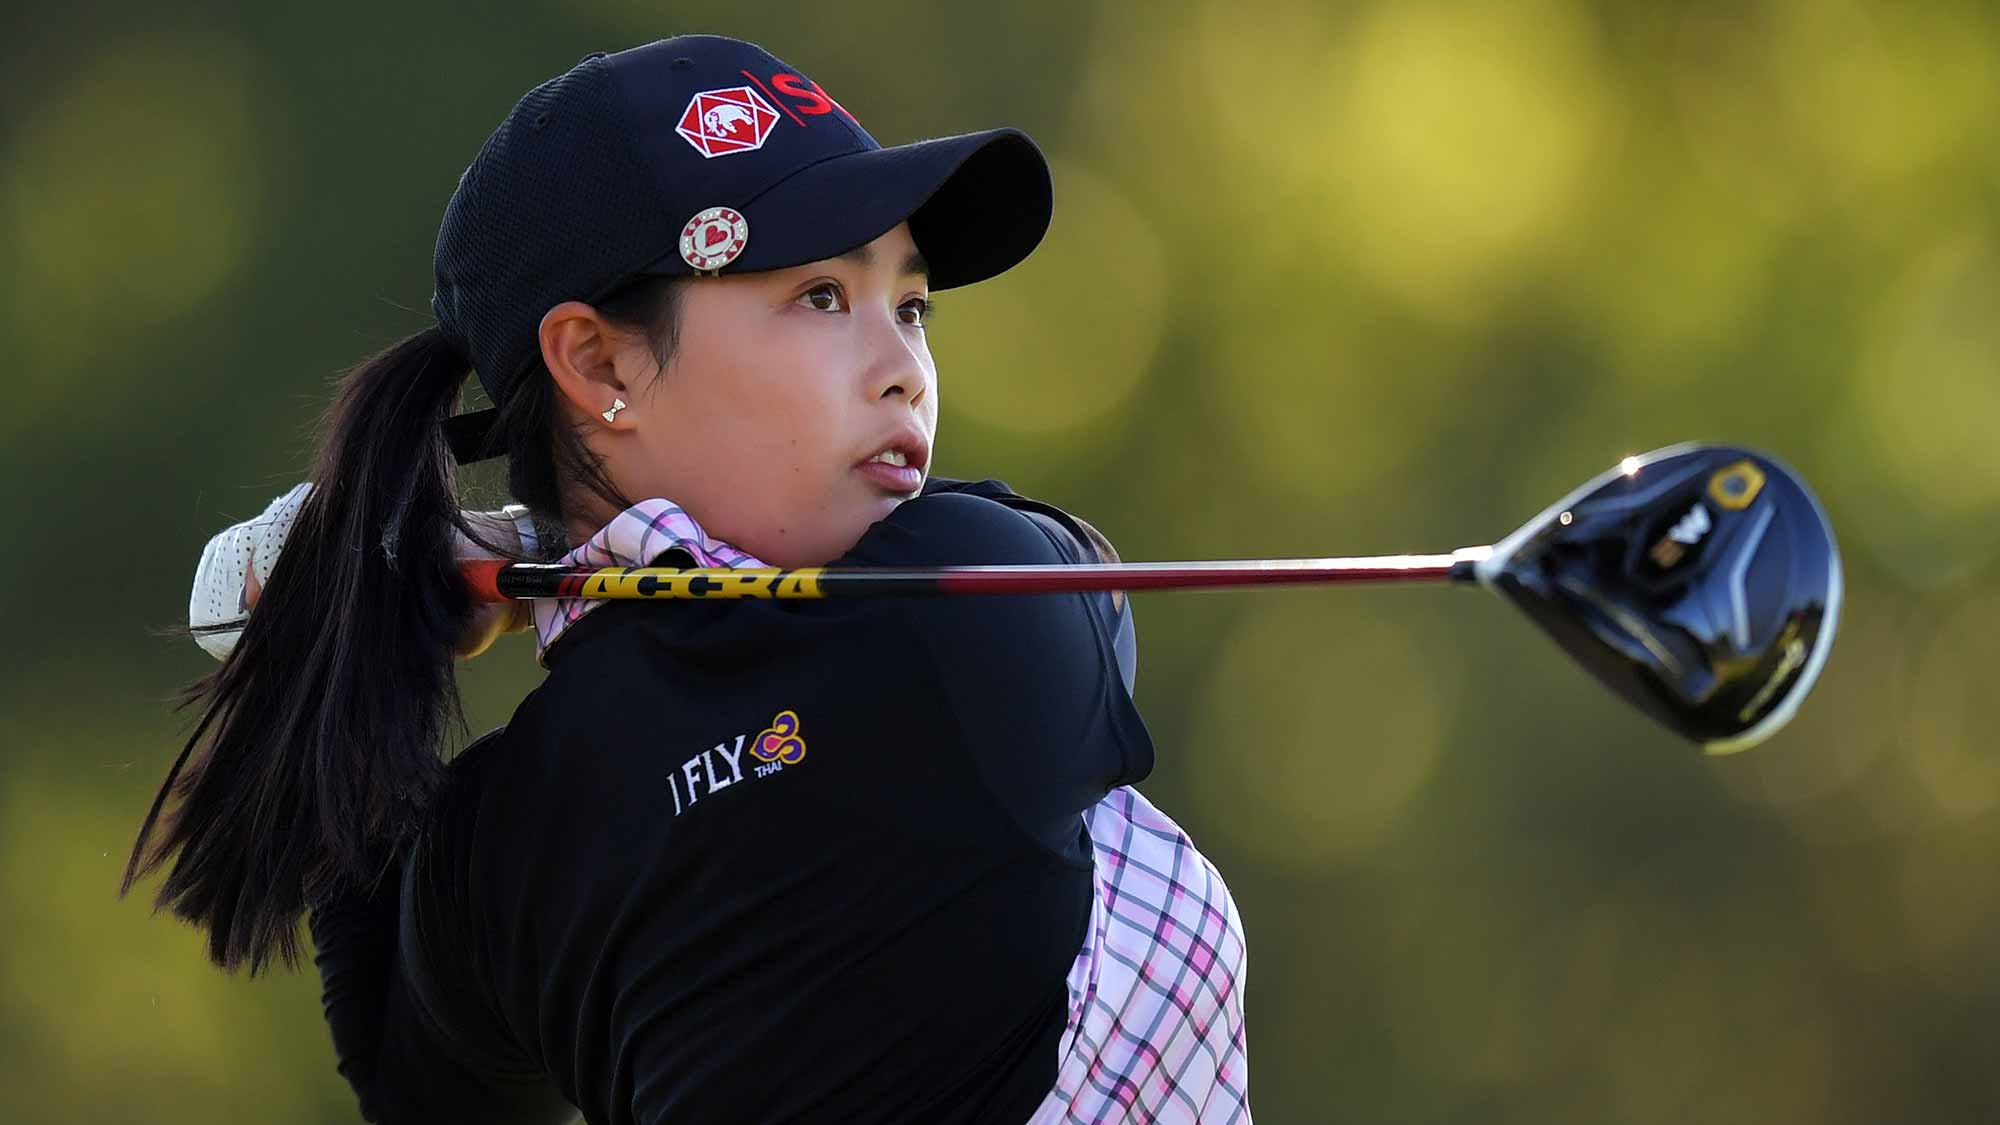 Moriya Jutanugarn of Thailand hits her tee shot on the 16th hole during the second round of the Walmart NW Arkansas Championship Presented by P&G